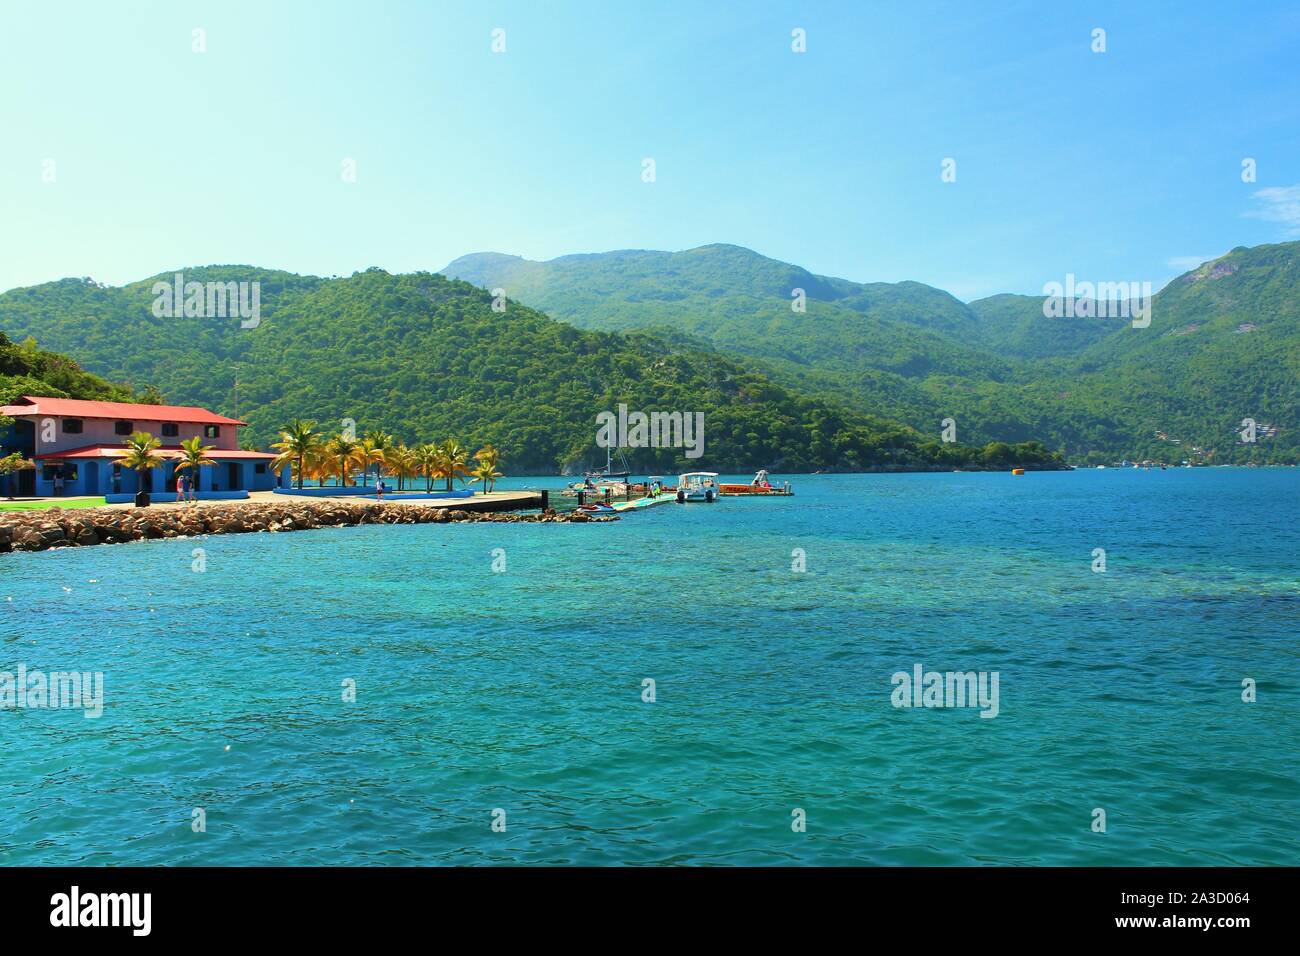 A section of the resort of Labadee, Haiti, which is privately owned by Royal Caribbean International for the exclusive use of its cruise ships. Stock Photo